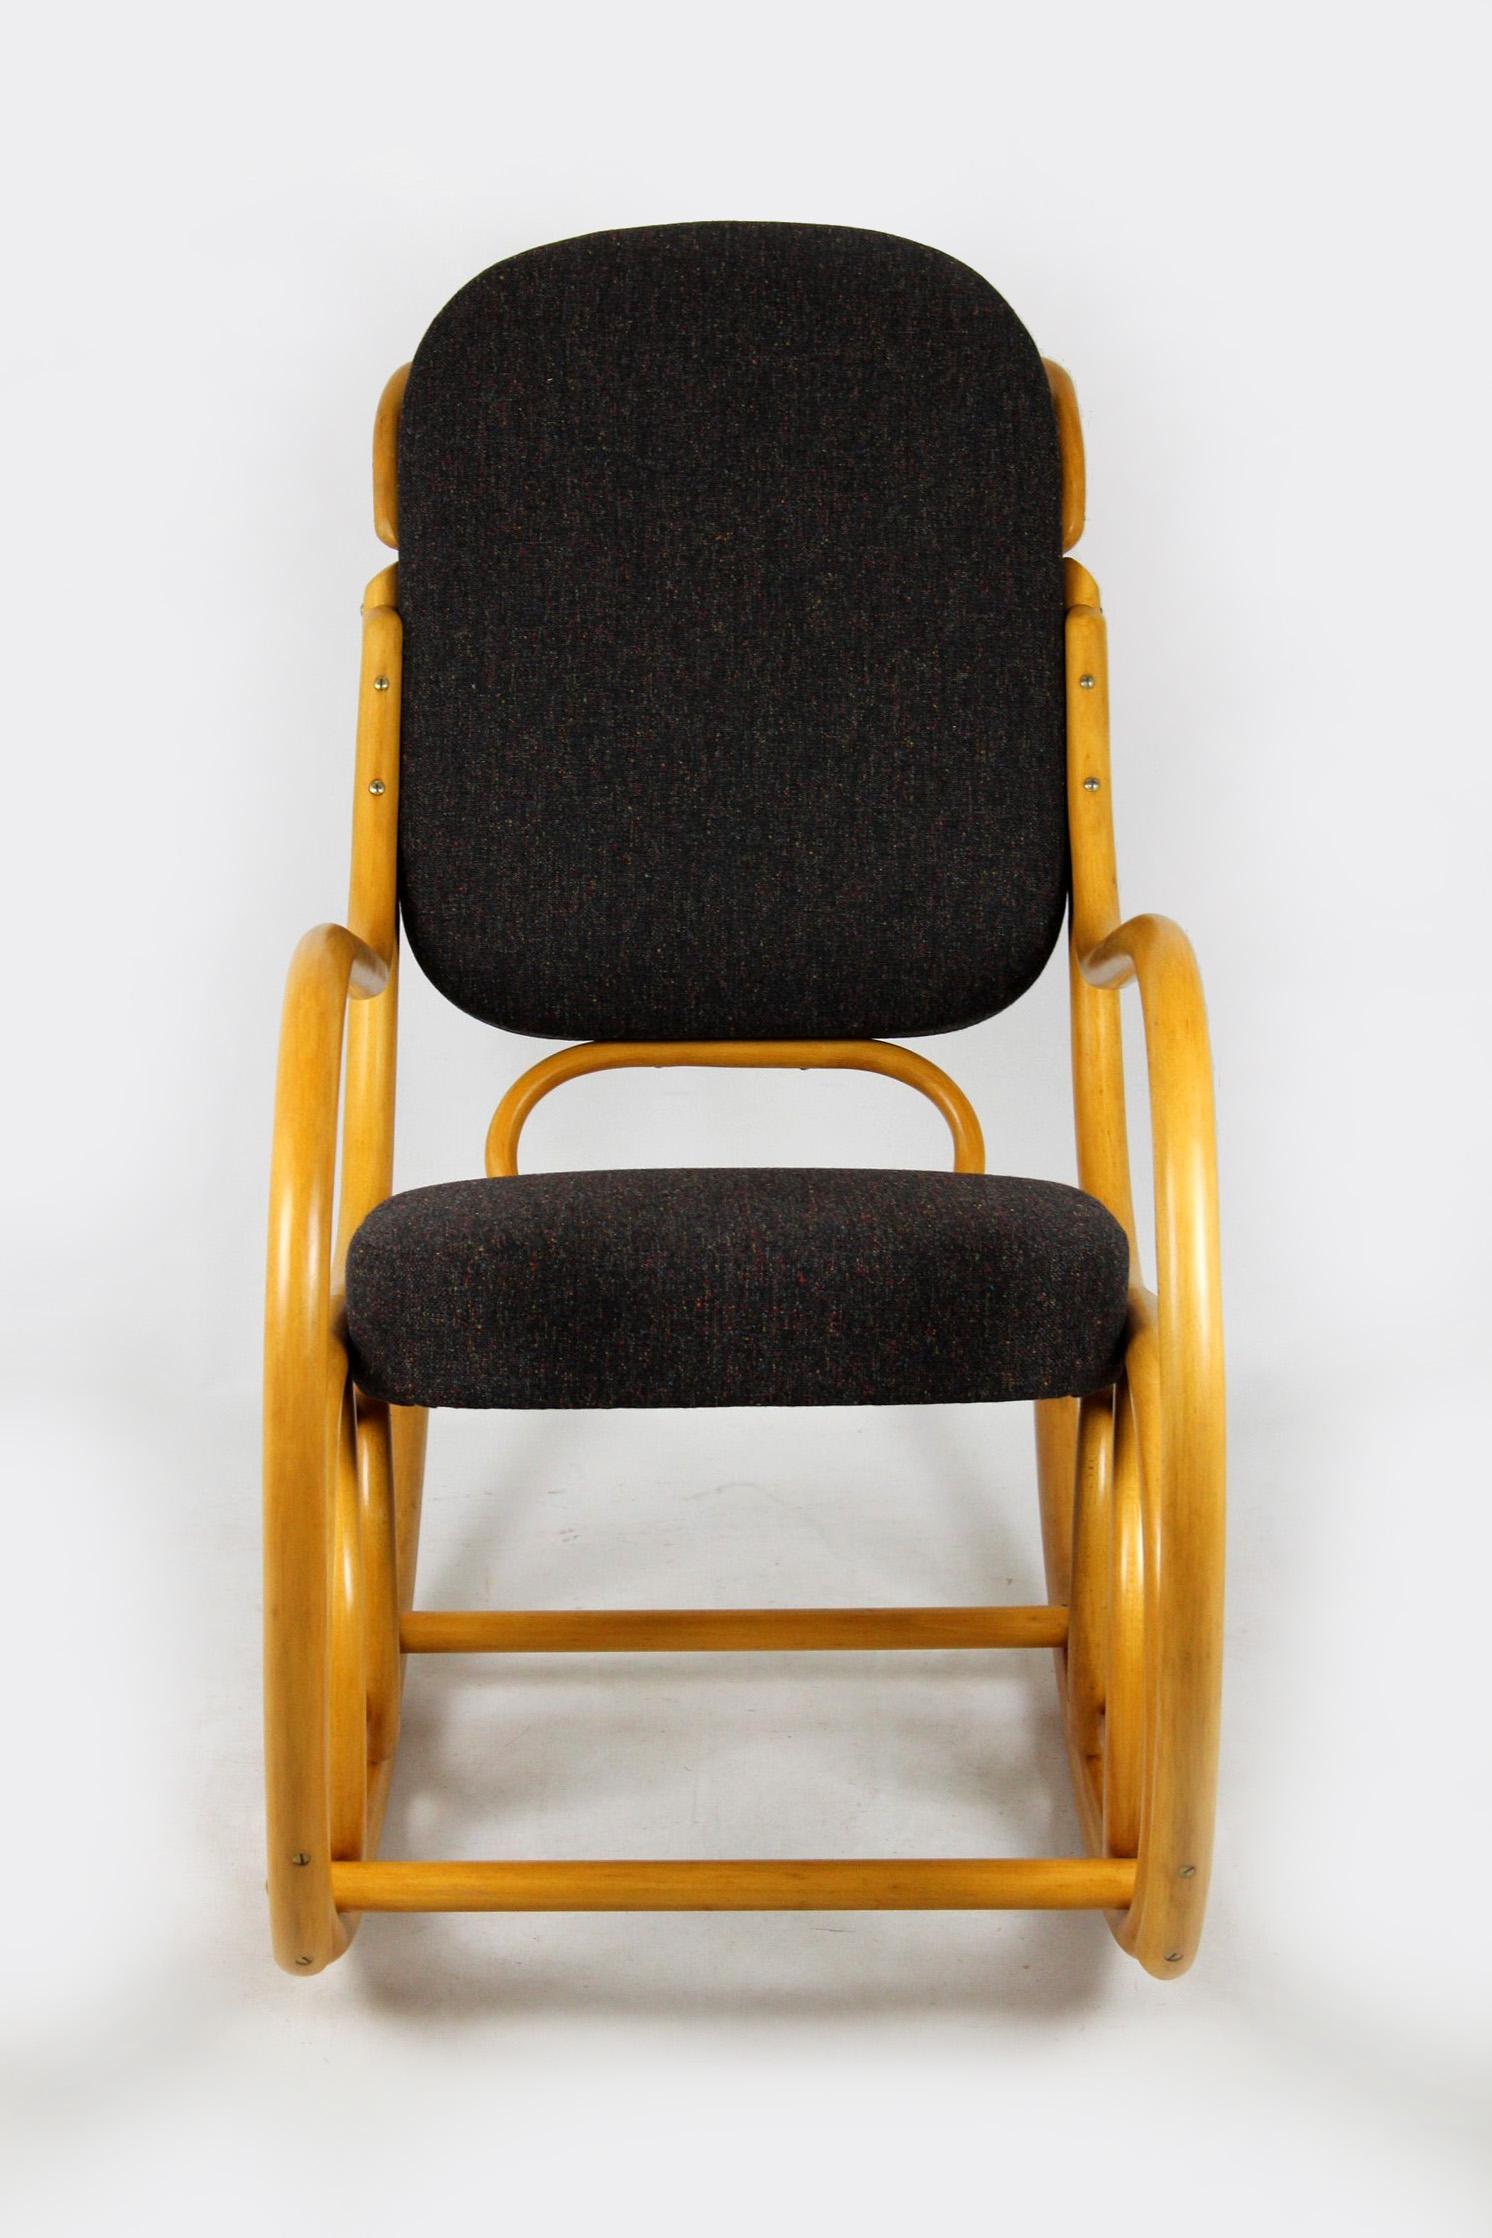 Midcentury Beech Bentwood Rocking Chair from Ton, 1960s For Sale 1